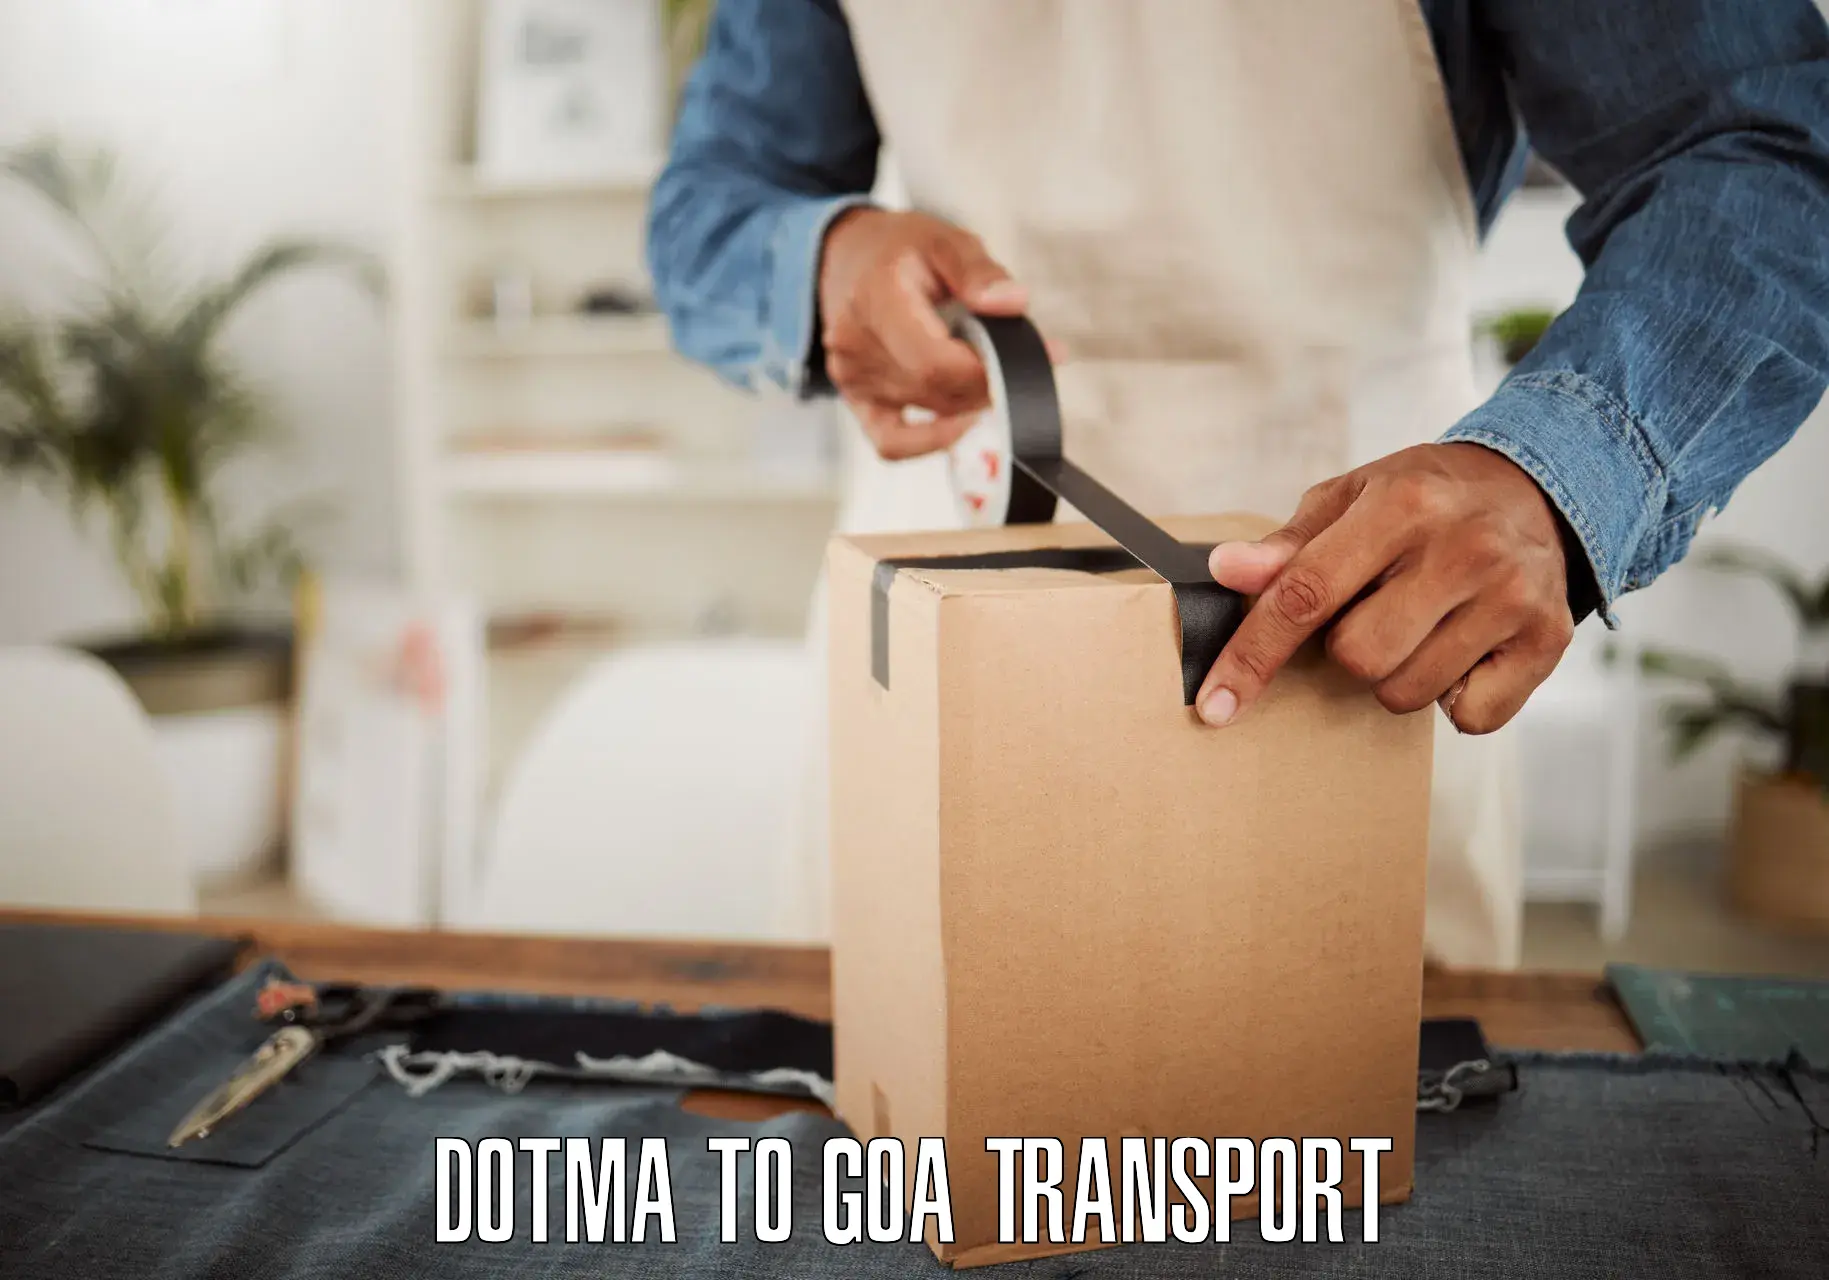 Transport in sharing in Dotma to Goa